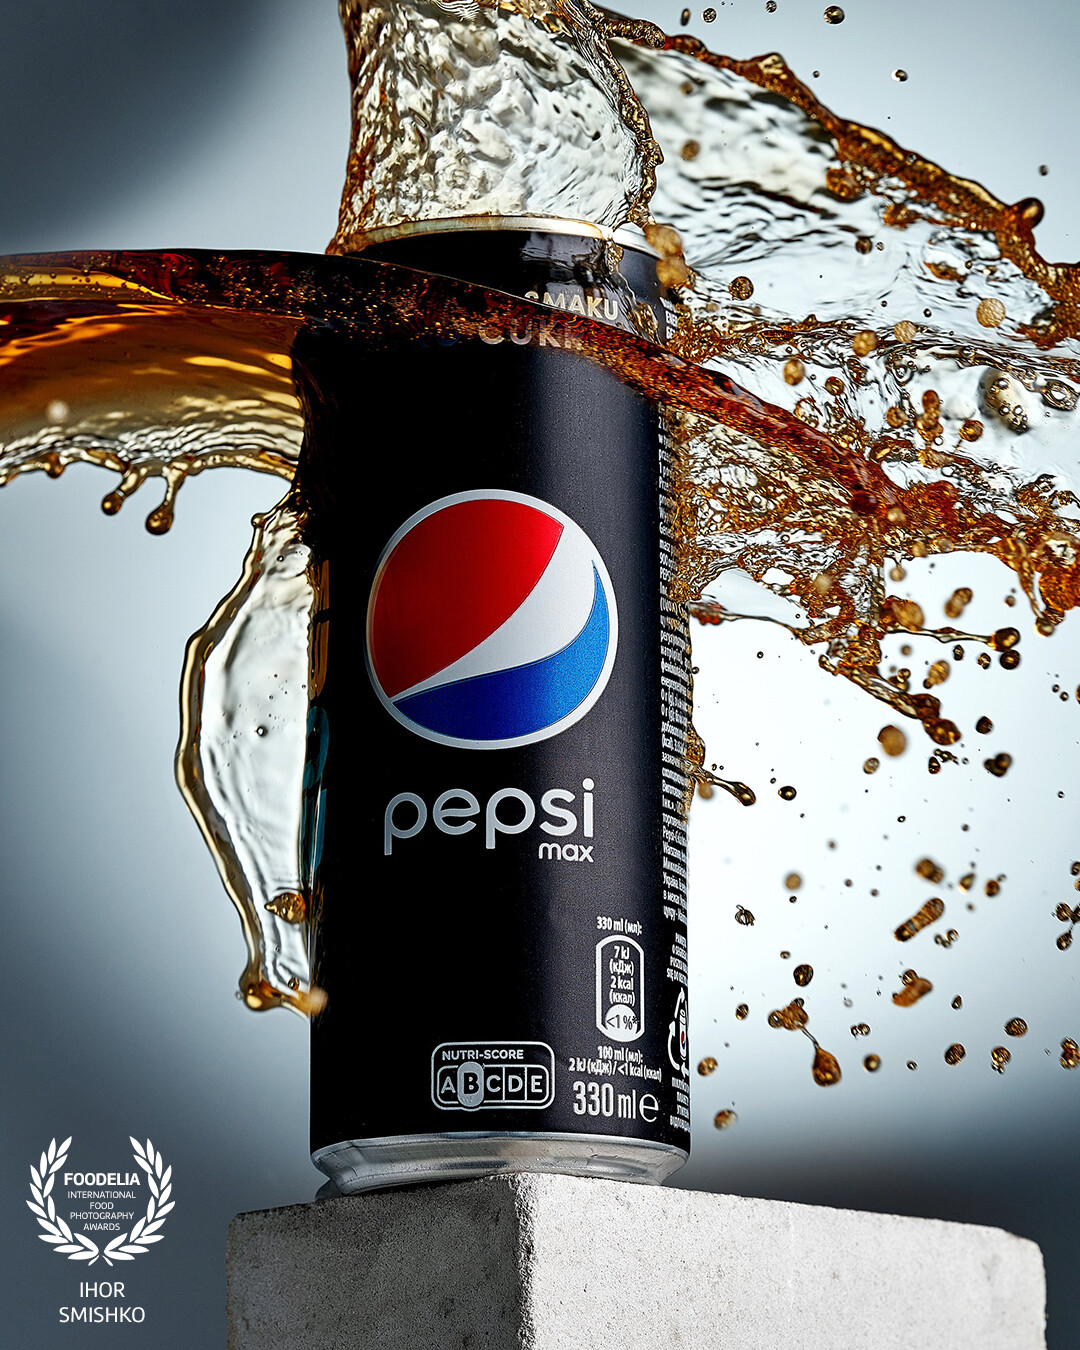 I really wanted to shoot advertising. Therefore, I came up with a technical task and implemented the idea with a splash. This is a classic for such drinks